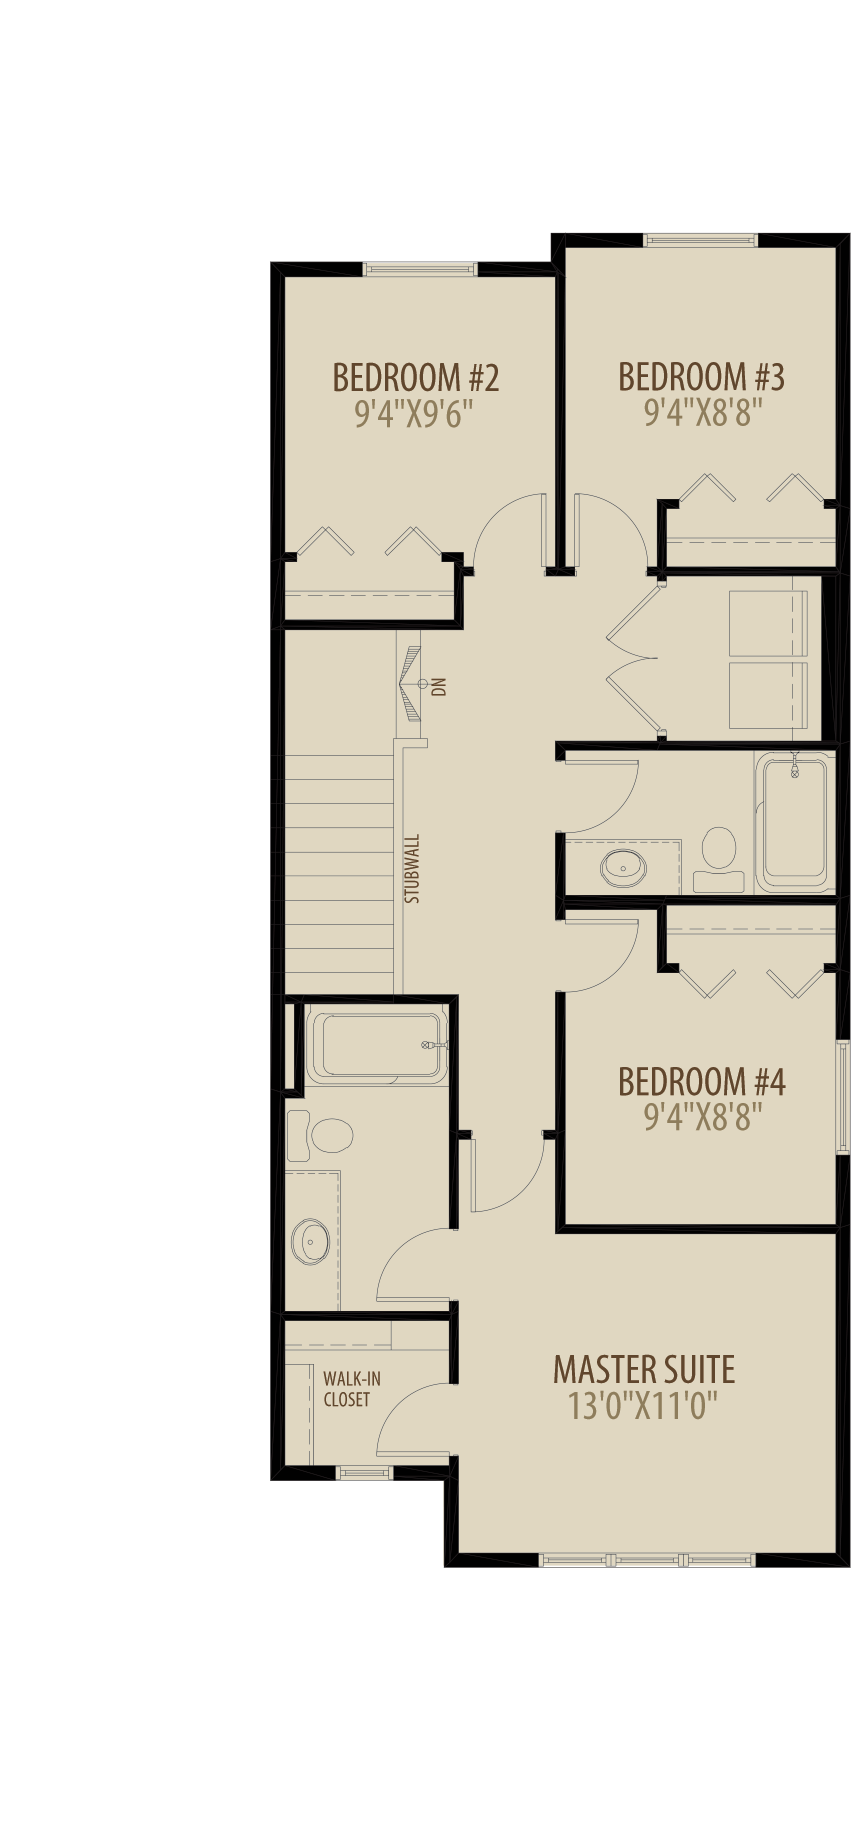 4th Bedroom Adds 10 sq ft